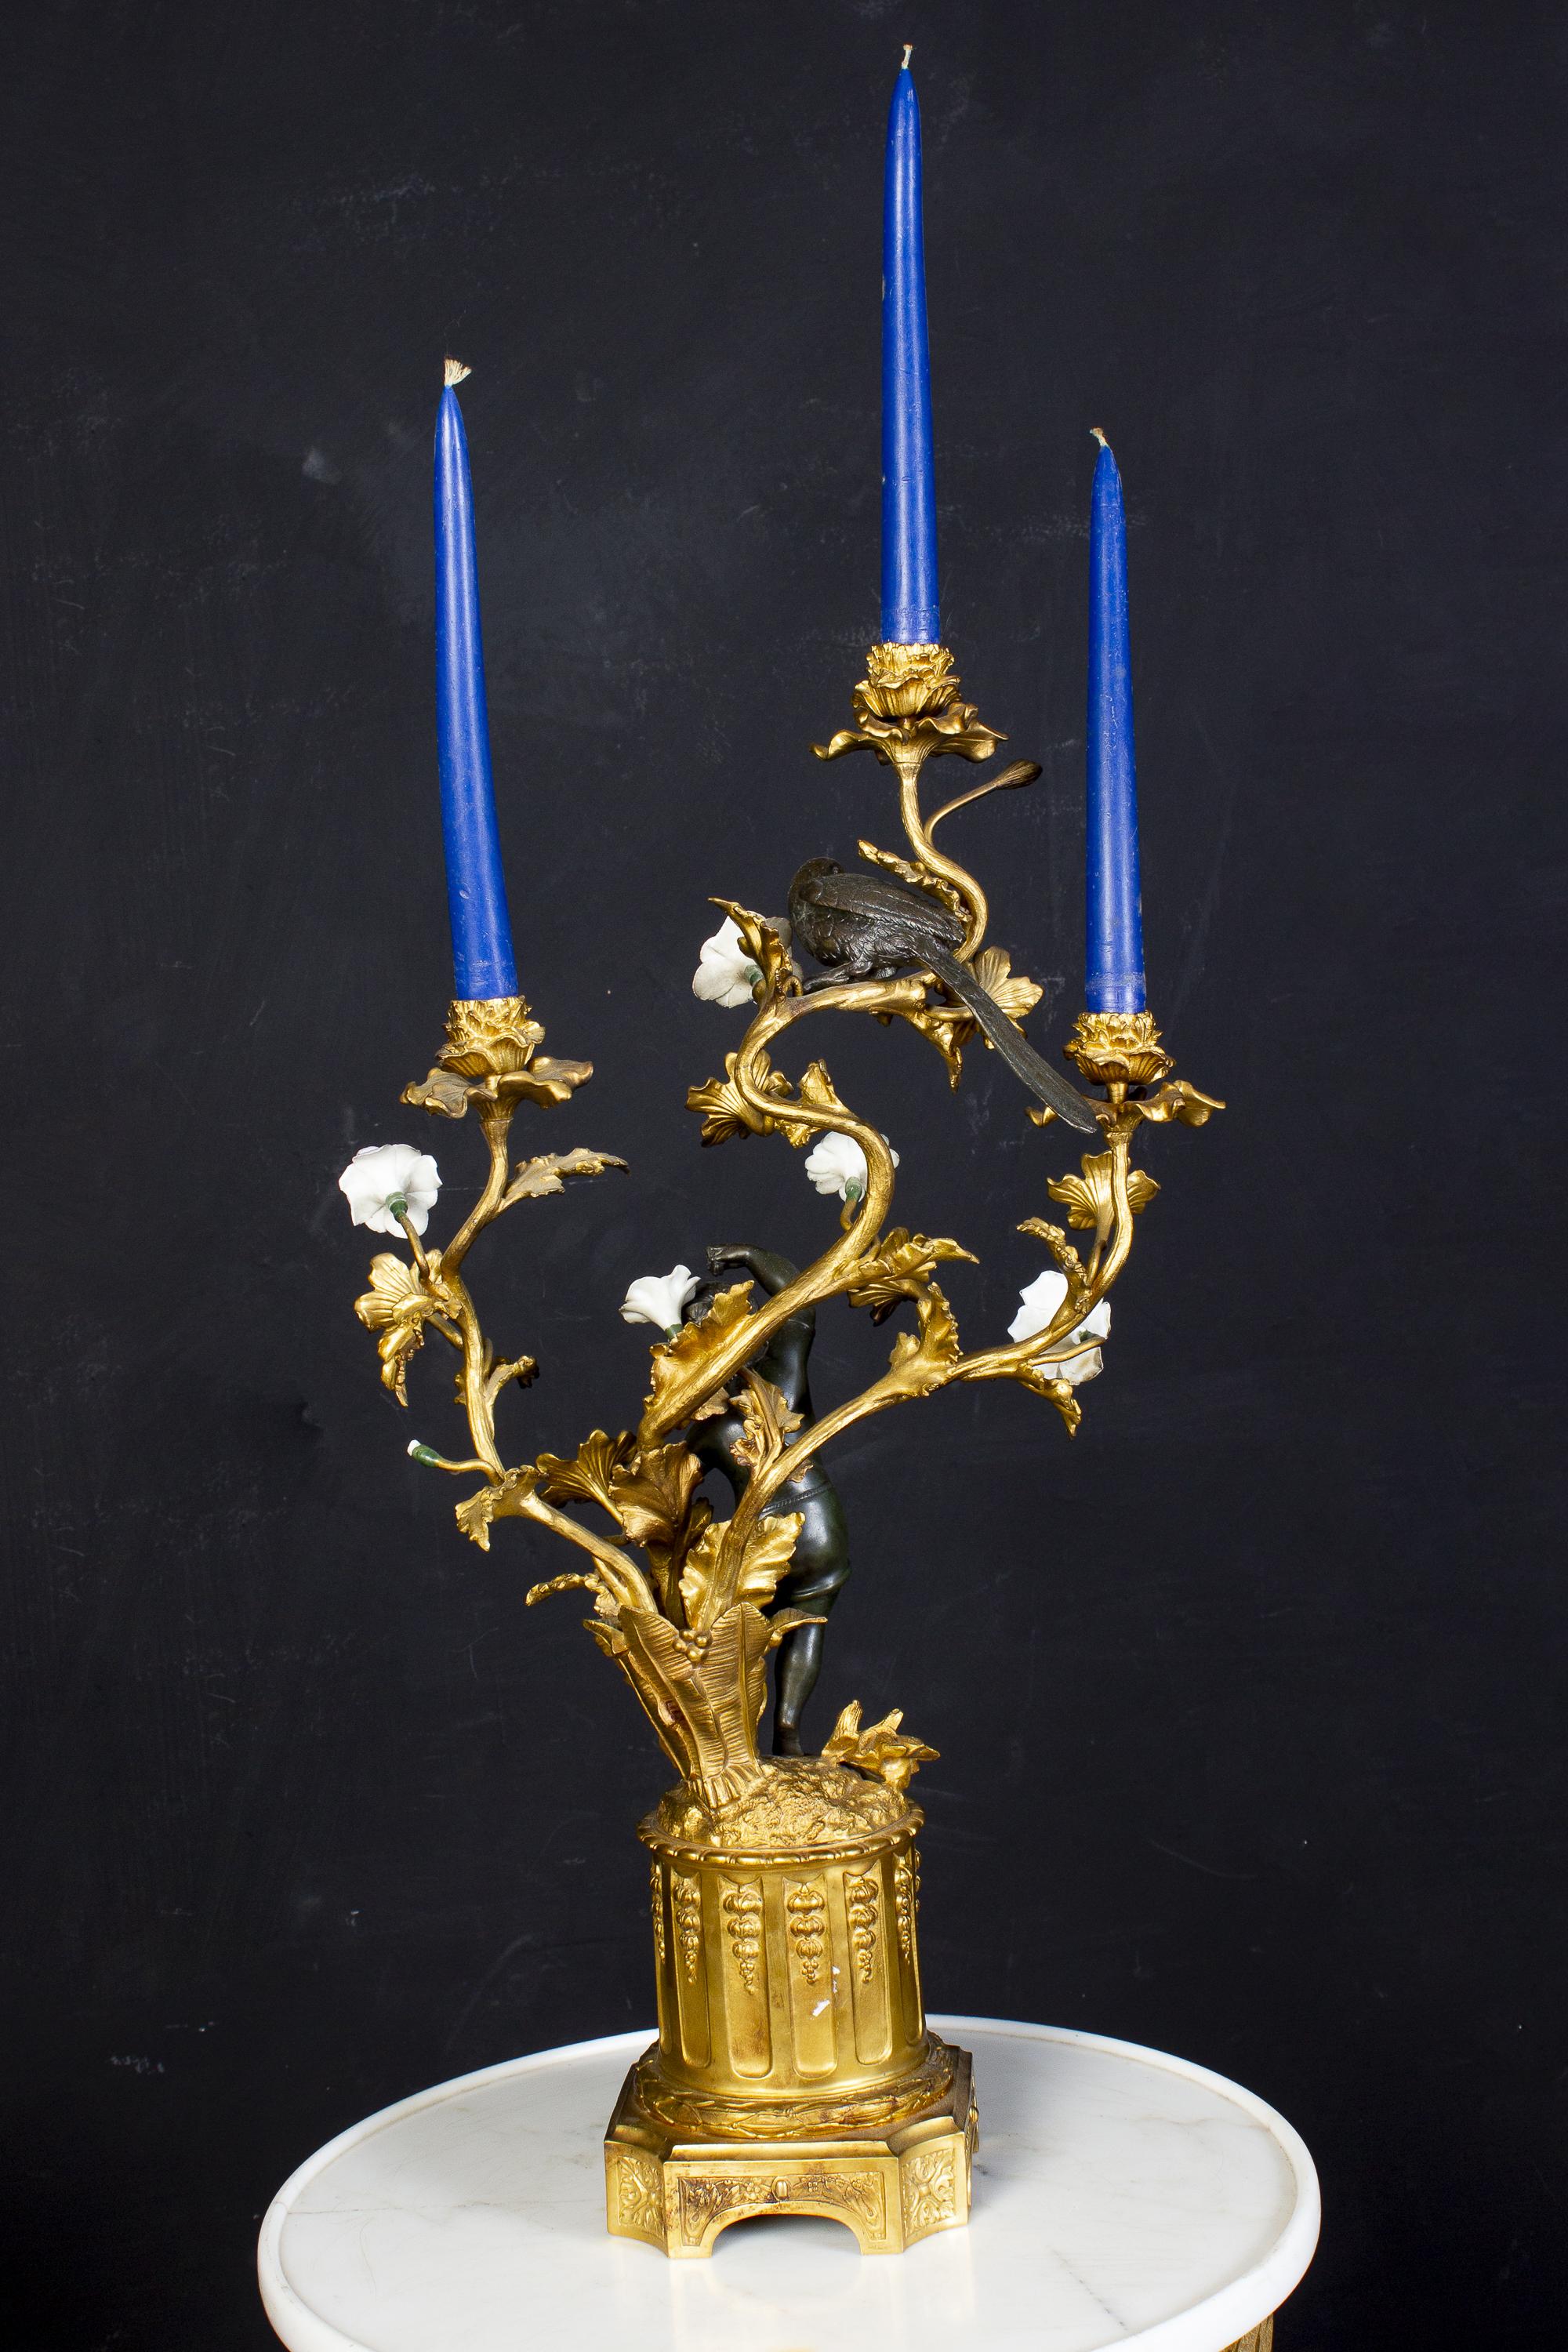 A fine pair of French 19th century bronze and gilt bronze candelabras, each with a dark bronze delicious dancing putto figures and parrots holding aloft three scrolled candle-branches with colorful Meissen Porcelain flowers.
Size: cm 60 x 35. plus